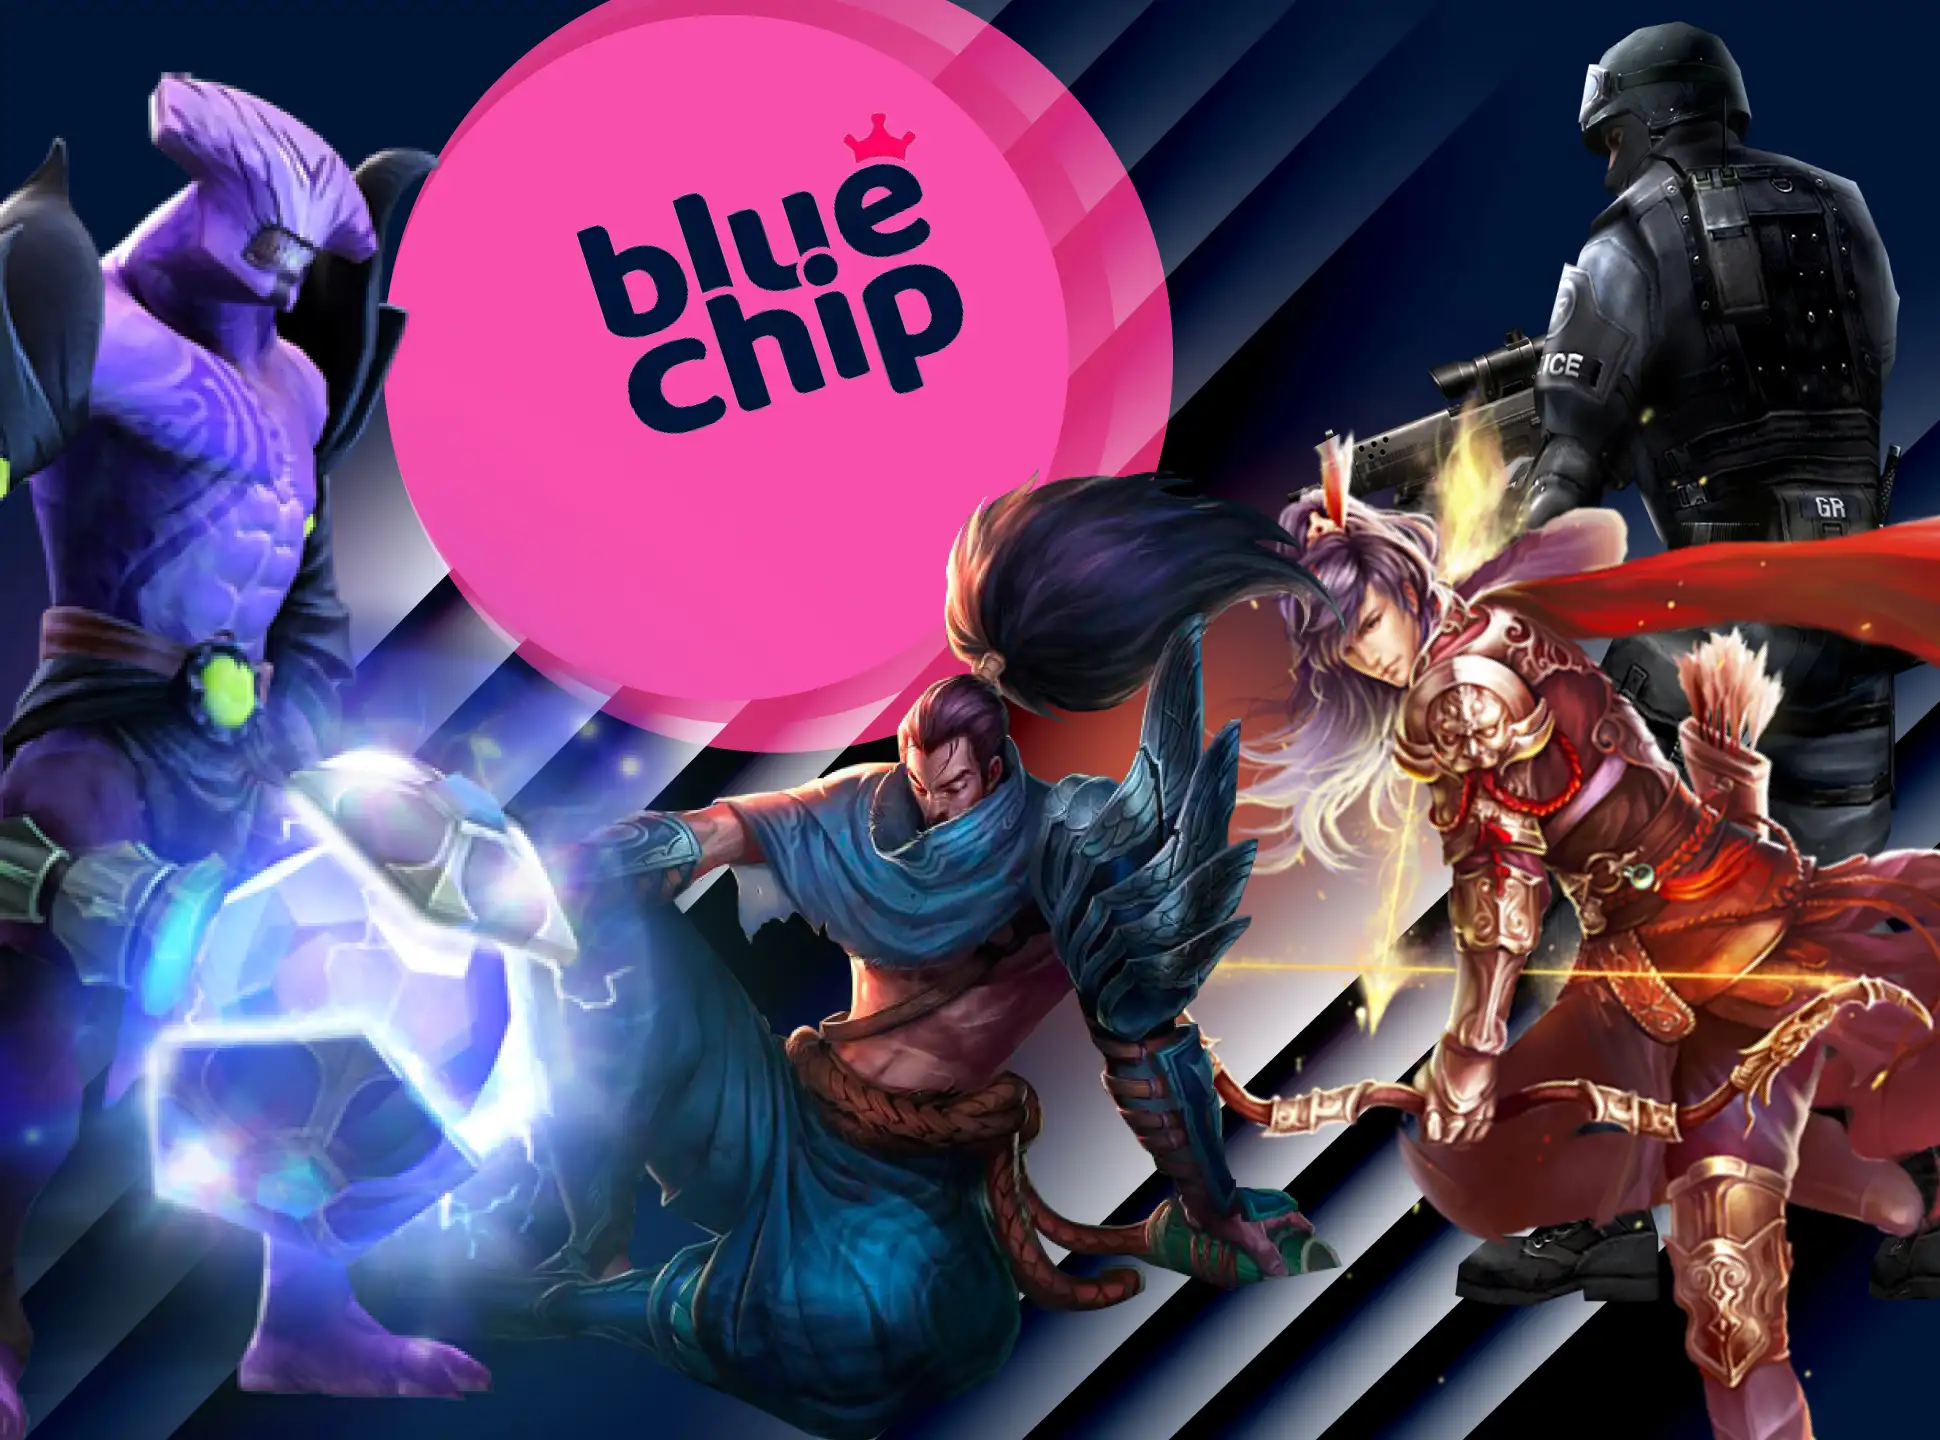 You can also bet on Dota 2, CS:GO and other cybersports at Bluechip.